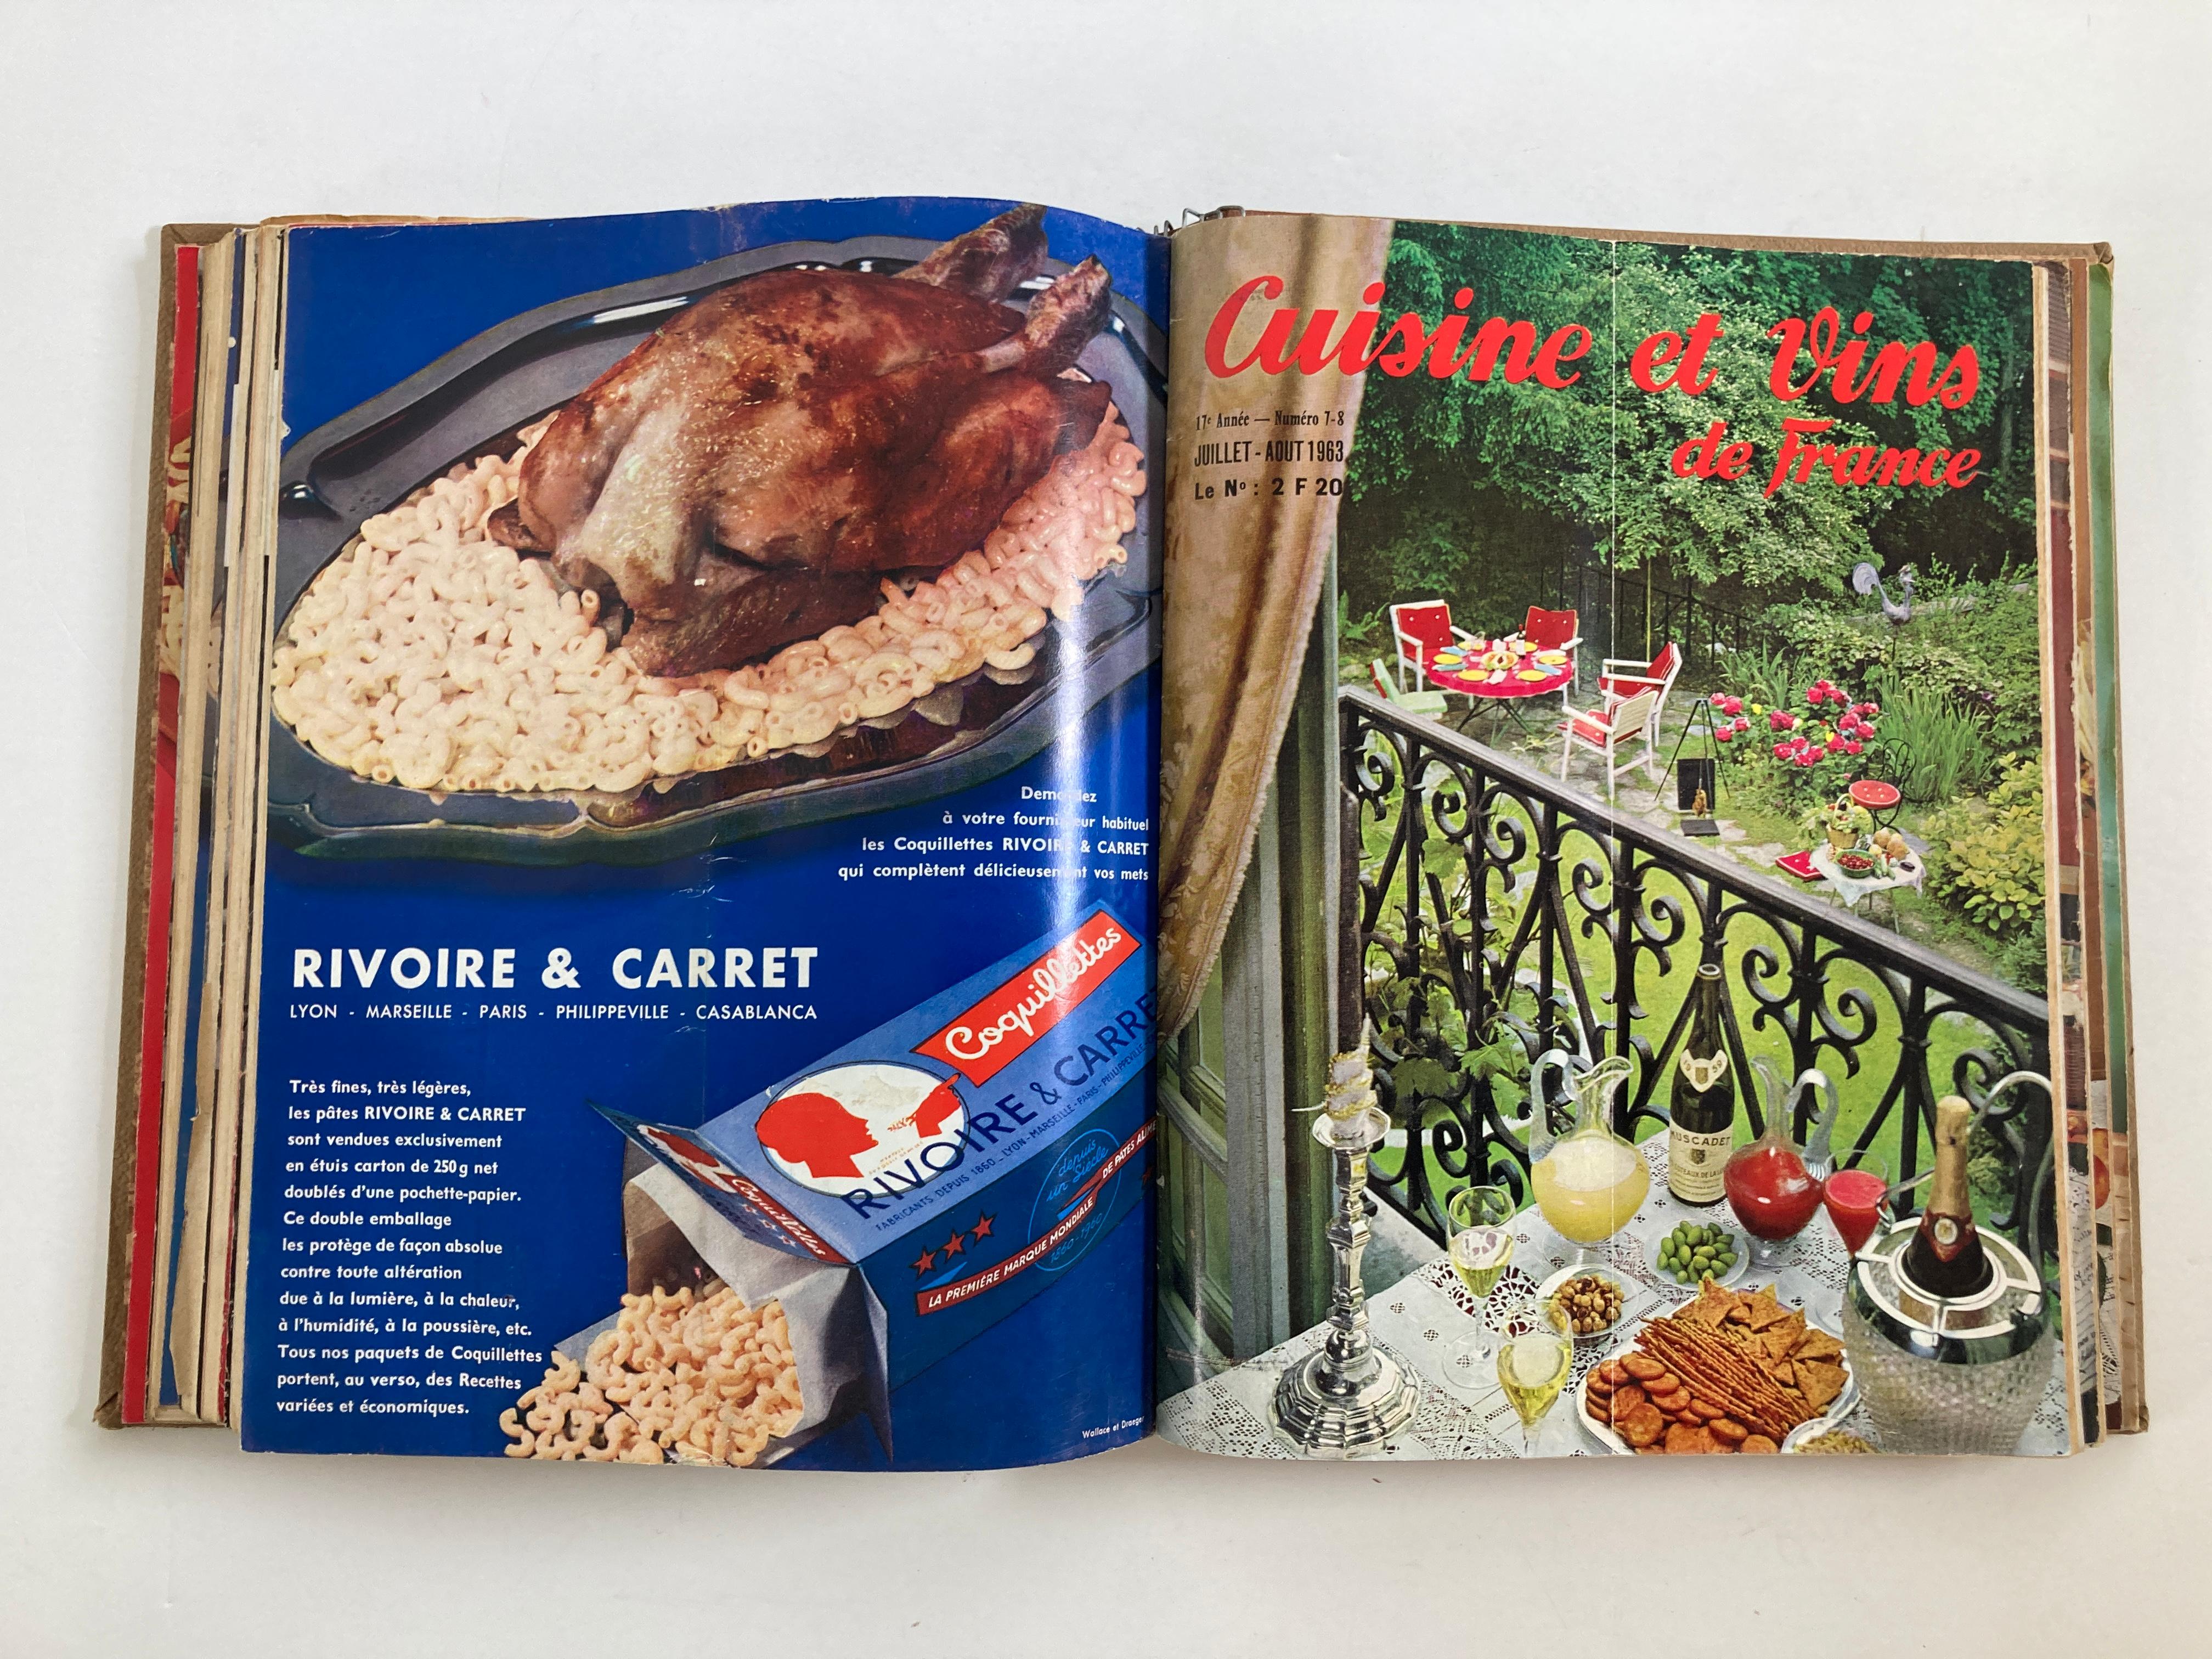 Cuisine and Wines of France by Larousse, Paris, 1963 French Cuisine Book 2